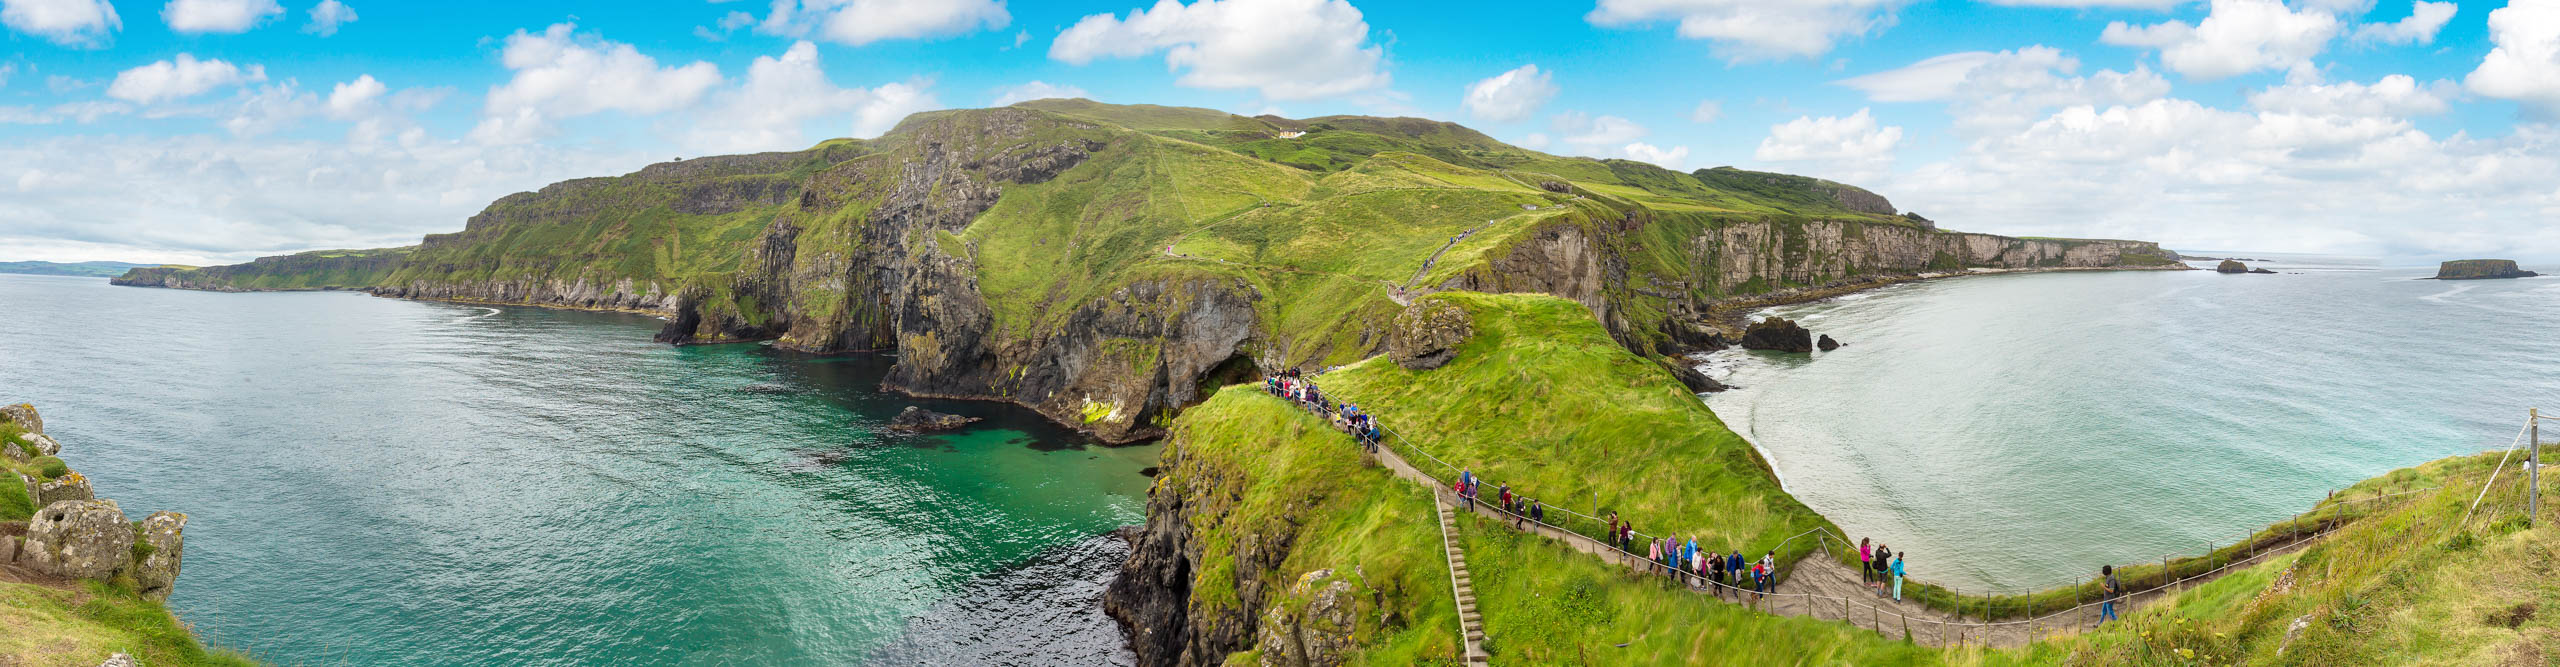 Carrick-a-Rede, Causeway Coast Route in a beautiful summer day, Northern Ireland